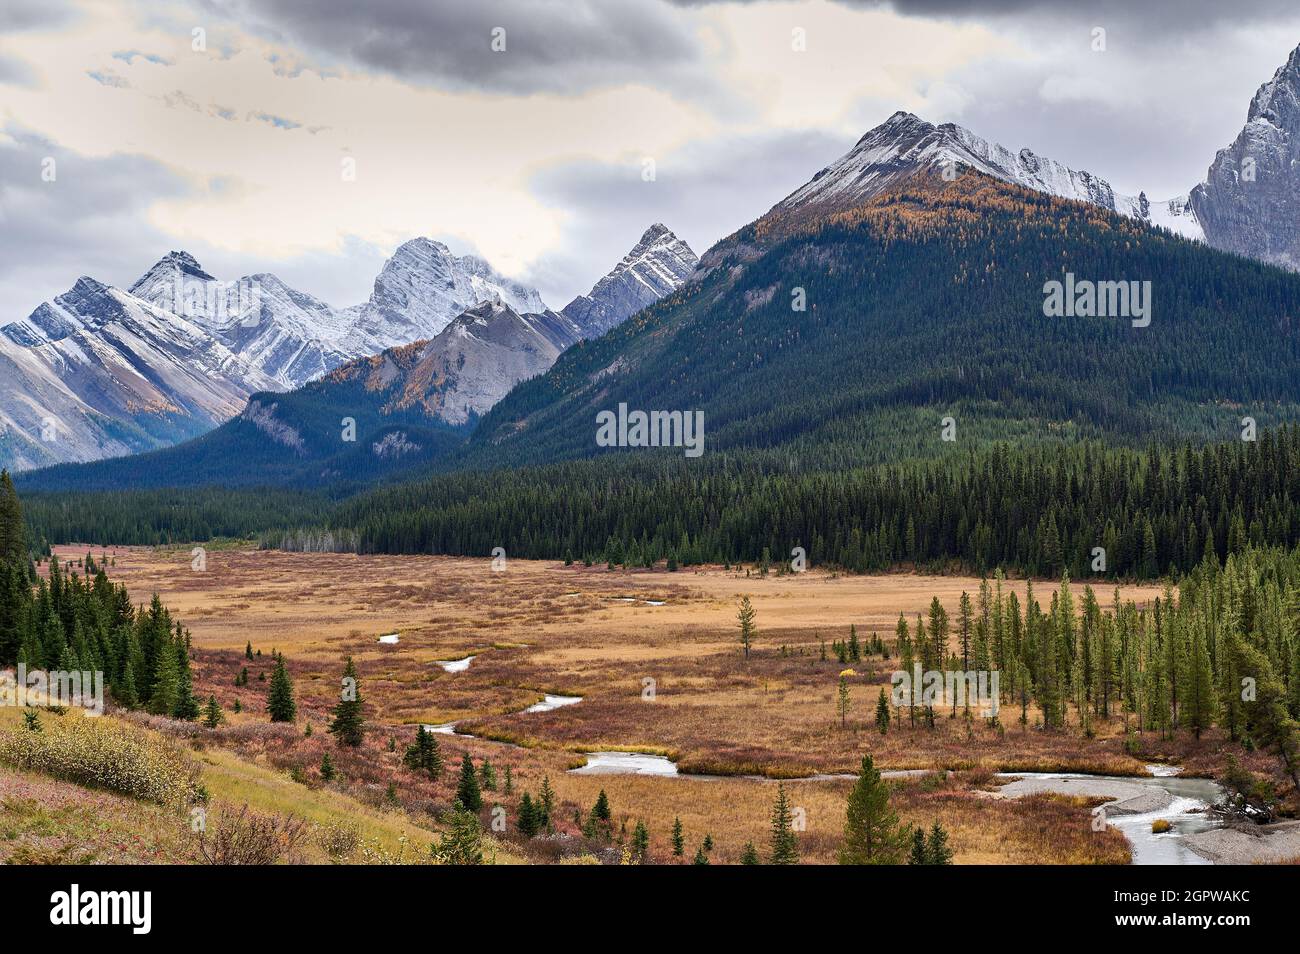 Mountains (L to R) Mount Murray, Mount French, Mount Burstall (Nearest has no name) , Spray Valley Provincial Park, Kananaskis Country, Alberta, Canad Stock Photo